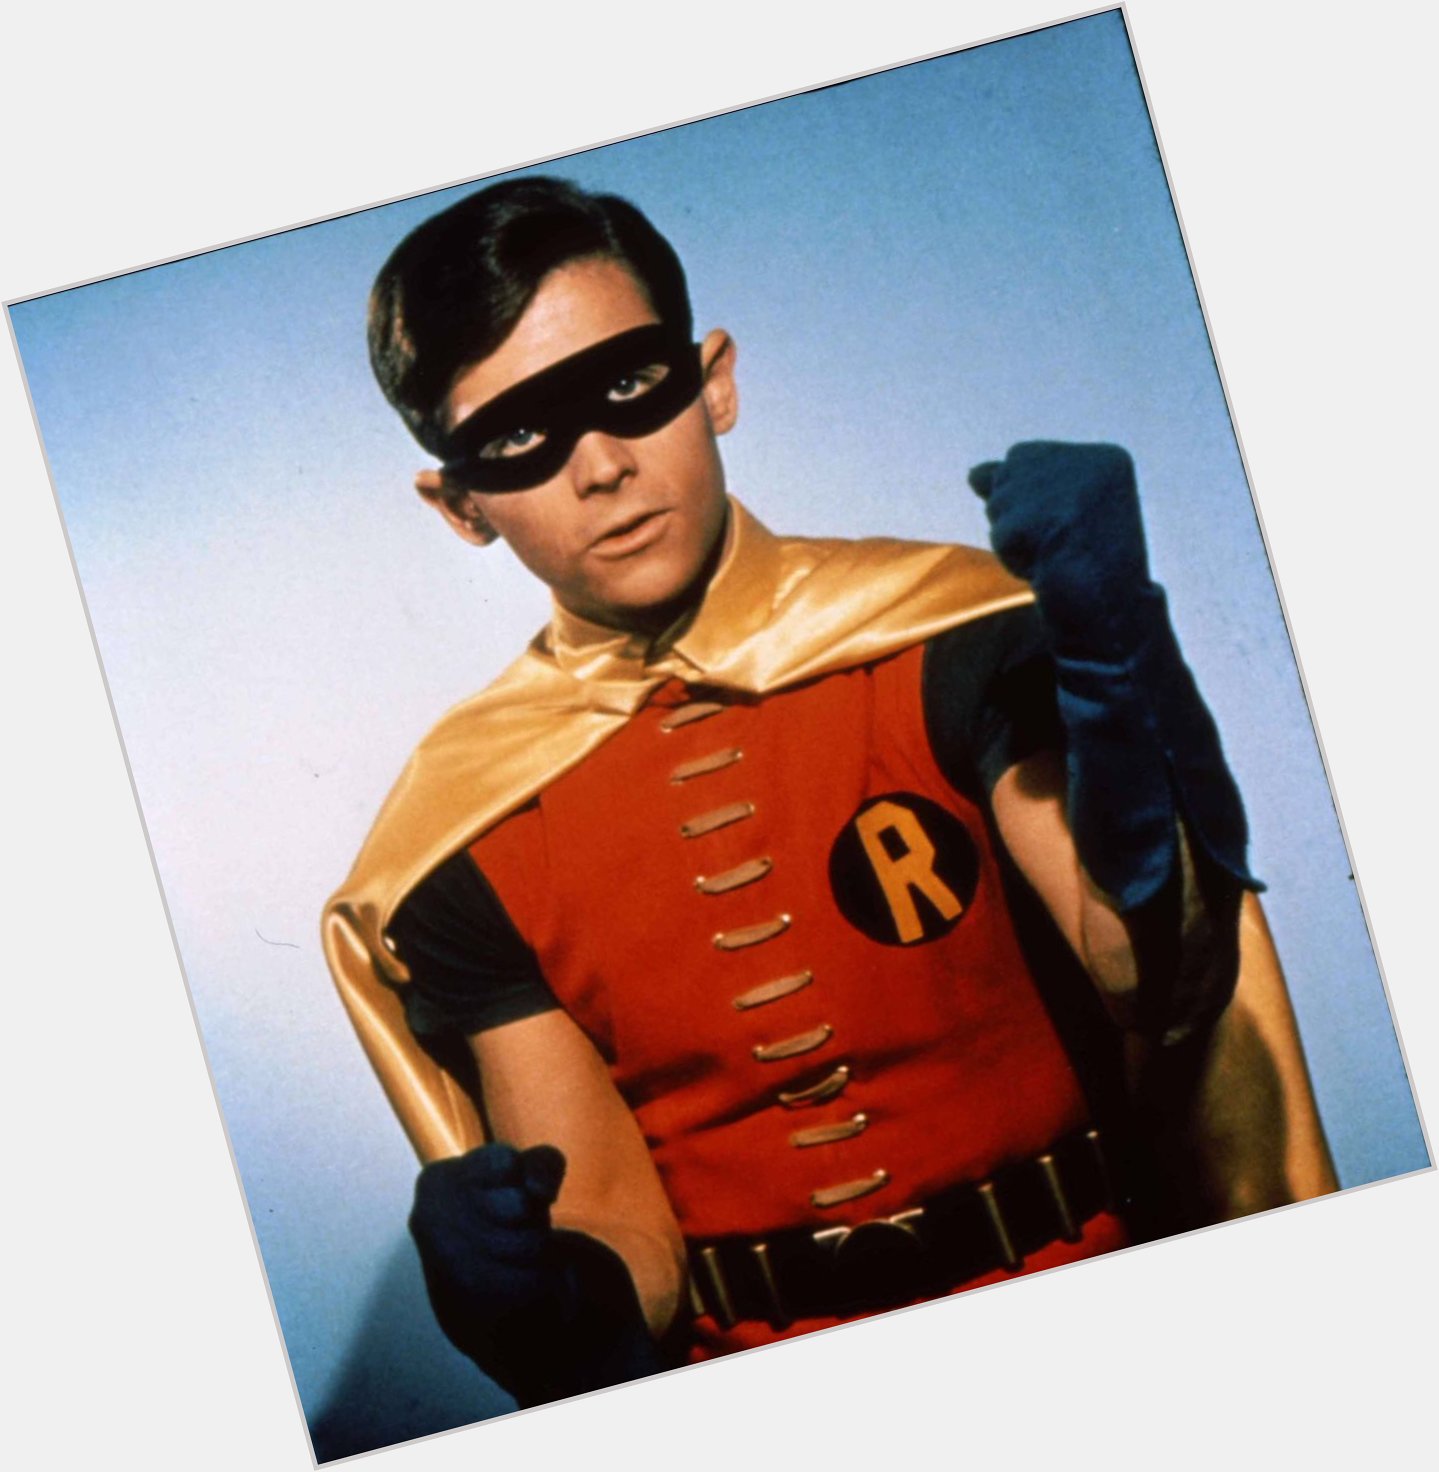 Wishing Burt Ward a happy 74th birthday! Watch him play Robin on What is your favorite Holy catchphrase? 